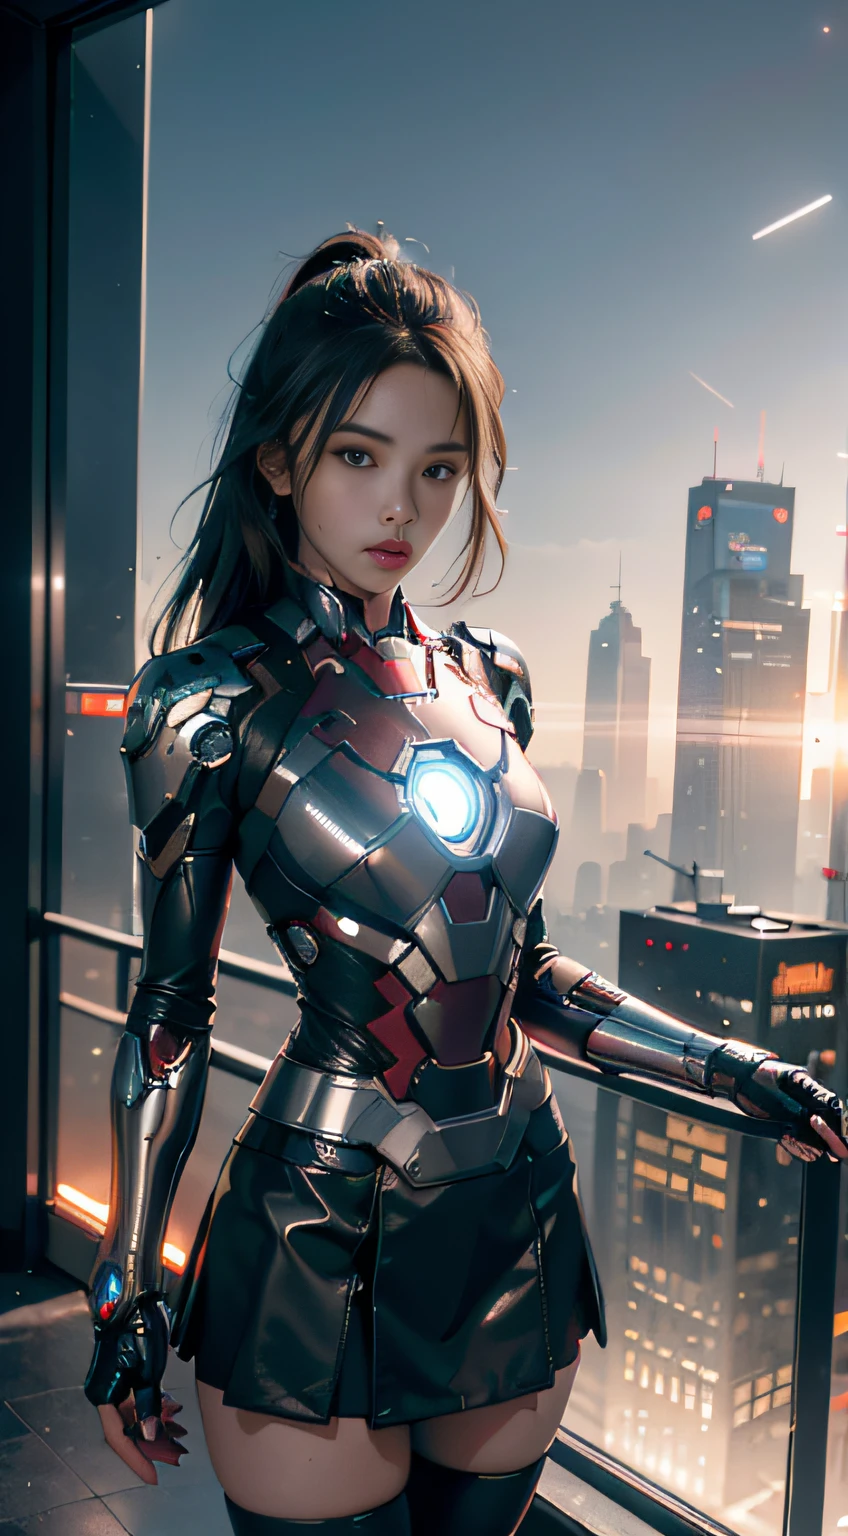 8k，realisticlying，Glamorous，The is very detailed，A 20-year-old girl, a sexy and charming woman, is inspired by Iron Man，Wearing a shiny Iron Man skirt。She dresses to show sexiness and confidence，It perfectly interprets the power and charm of Iron Man。In a cyberpunk-style night view of the city，A sexy and charming woman with an actor-playing theme for Iron Man。She wears a shiny Iron Man skirt，Stand on a street lined with tall buildings。The night view of the city is brightly lit，Reflected on her mech，It adds a sense of futuristic technology。The surrounding buildings and streets are full of cyberpunk elements，Like neon lights、High-tech installation and futuristic architectural design。The whole scene is full of futuristic and sci-fi atmosphere。This one is high definition、High-quality images will give you a stunning visual enjoyment，Will be sexy、Futuristic and sci-fi elements are a perfect combination。OC rendering，dramatic lights，Award-winning quality